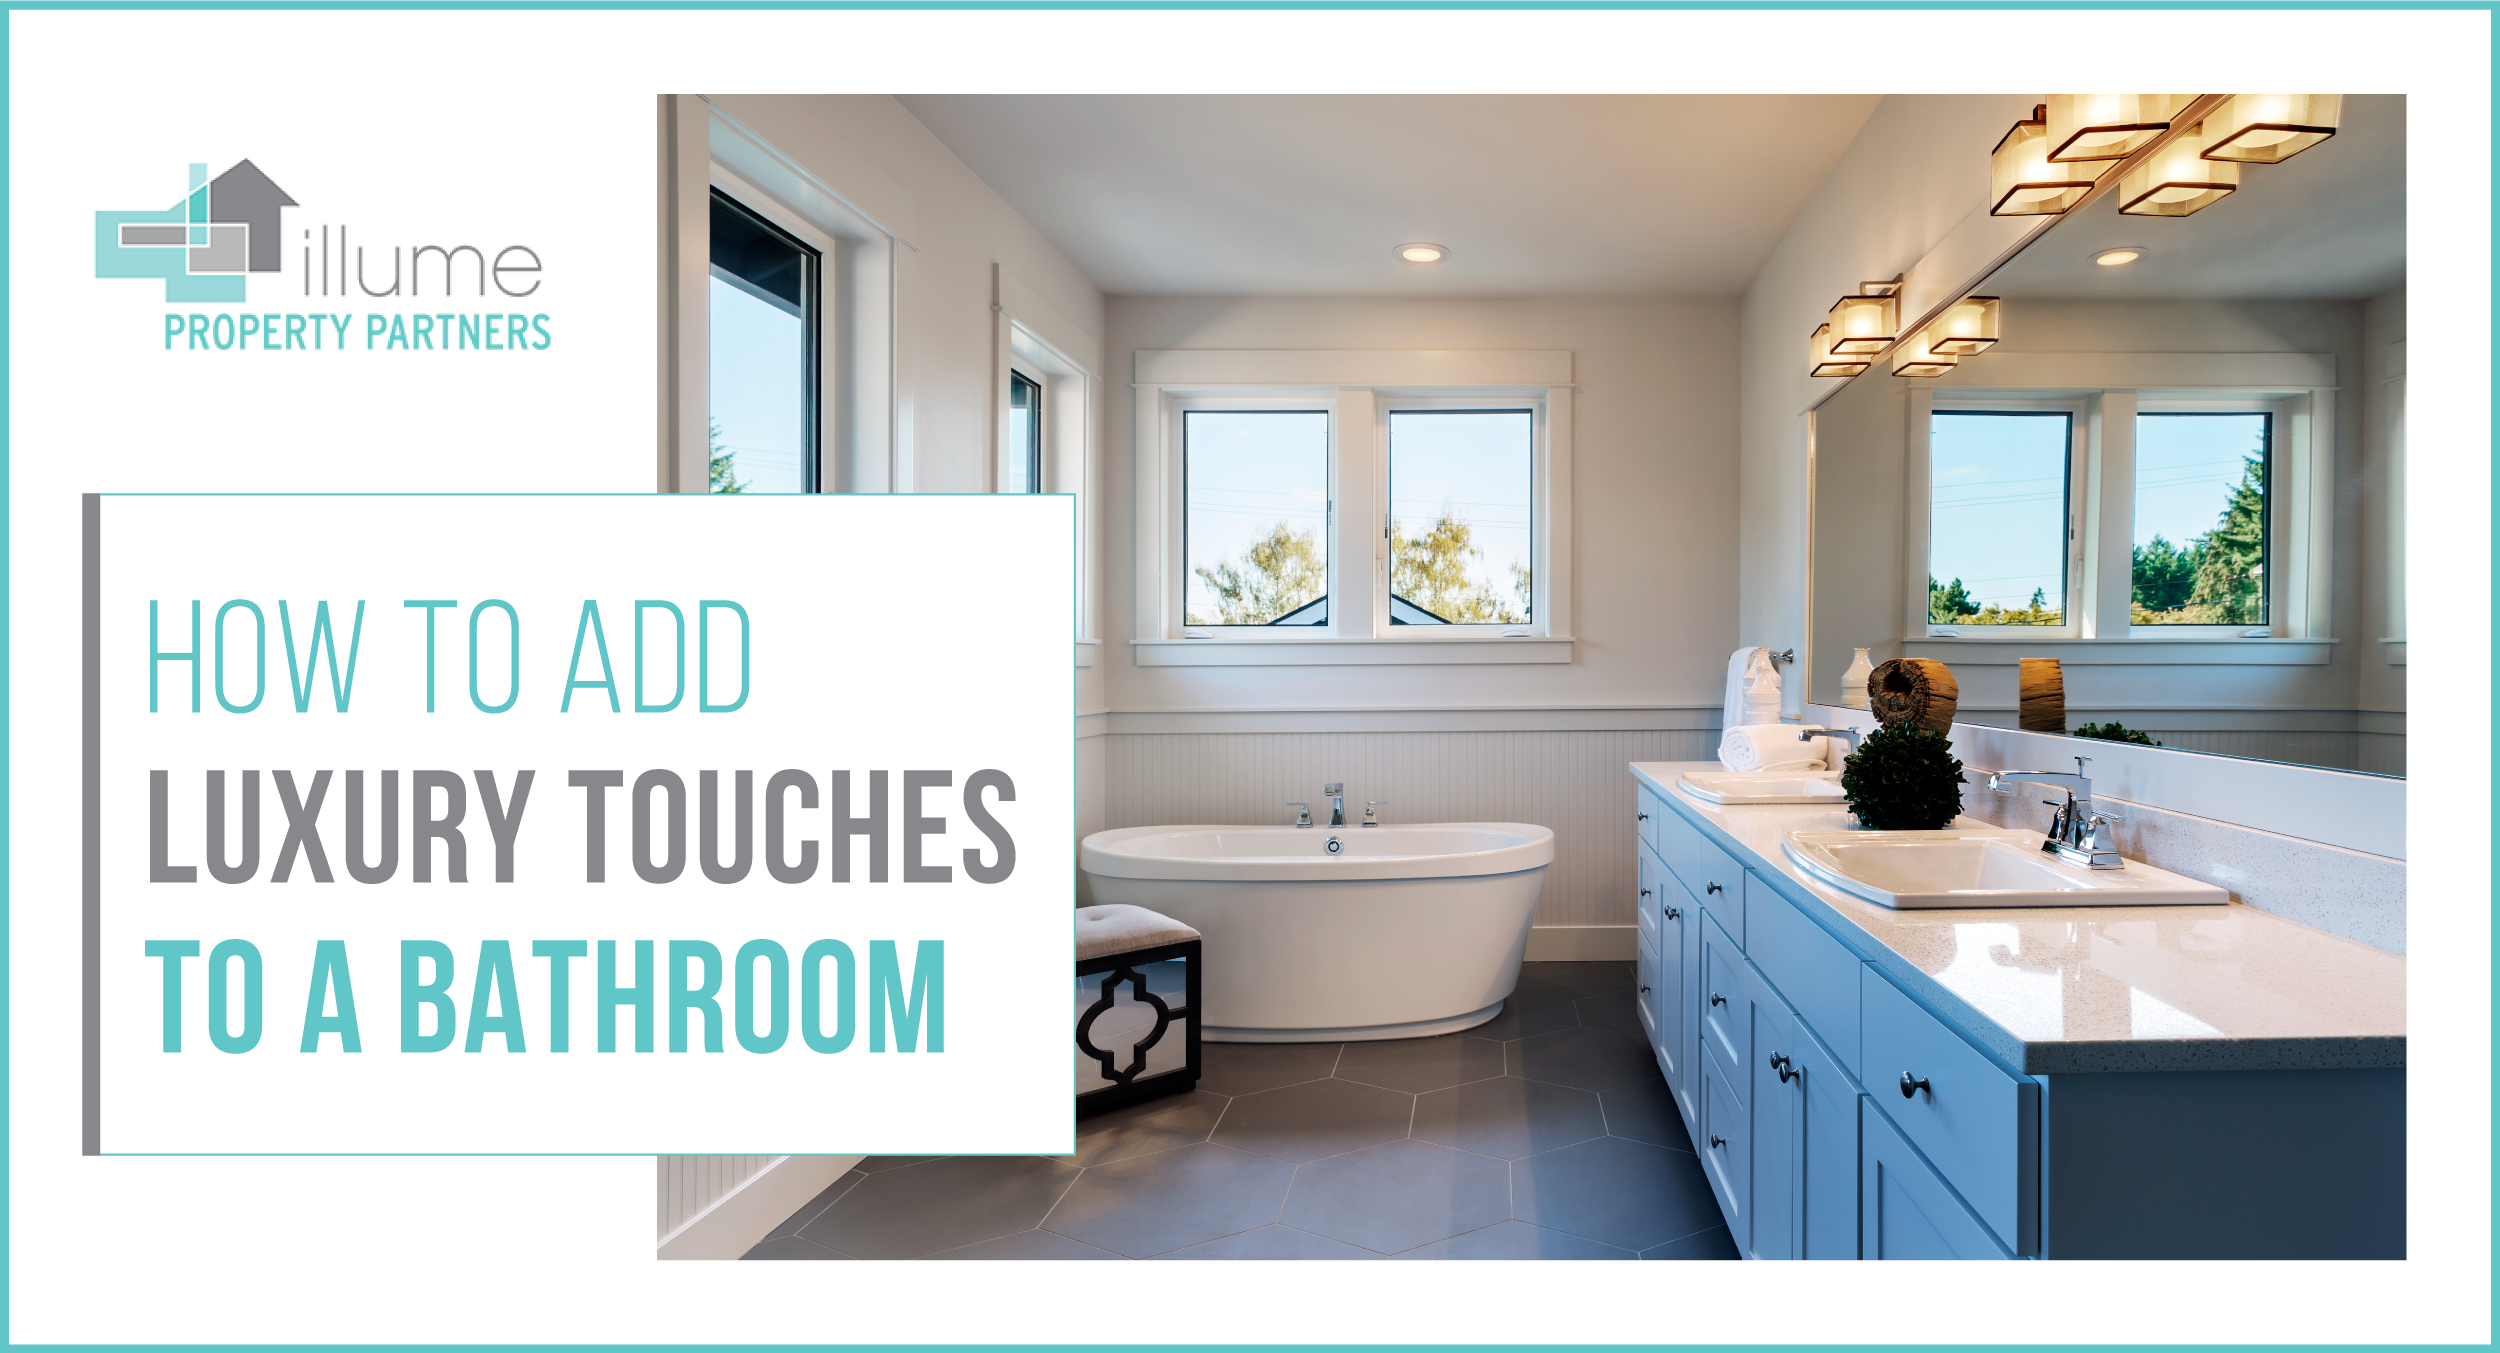 How to Add Luxury Touches to a Bathroom